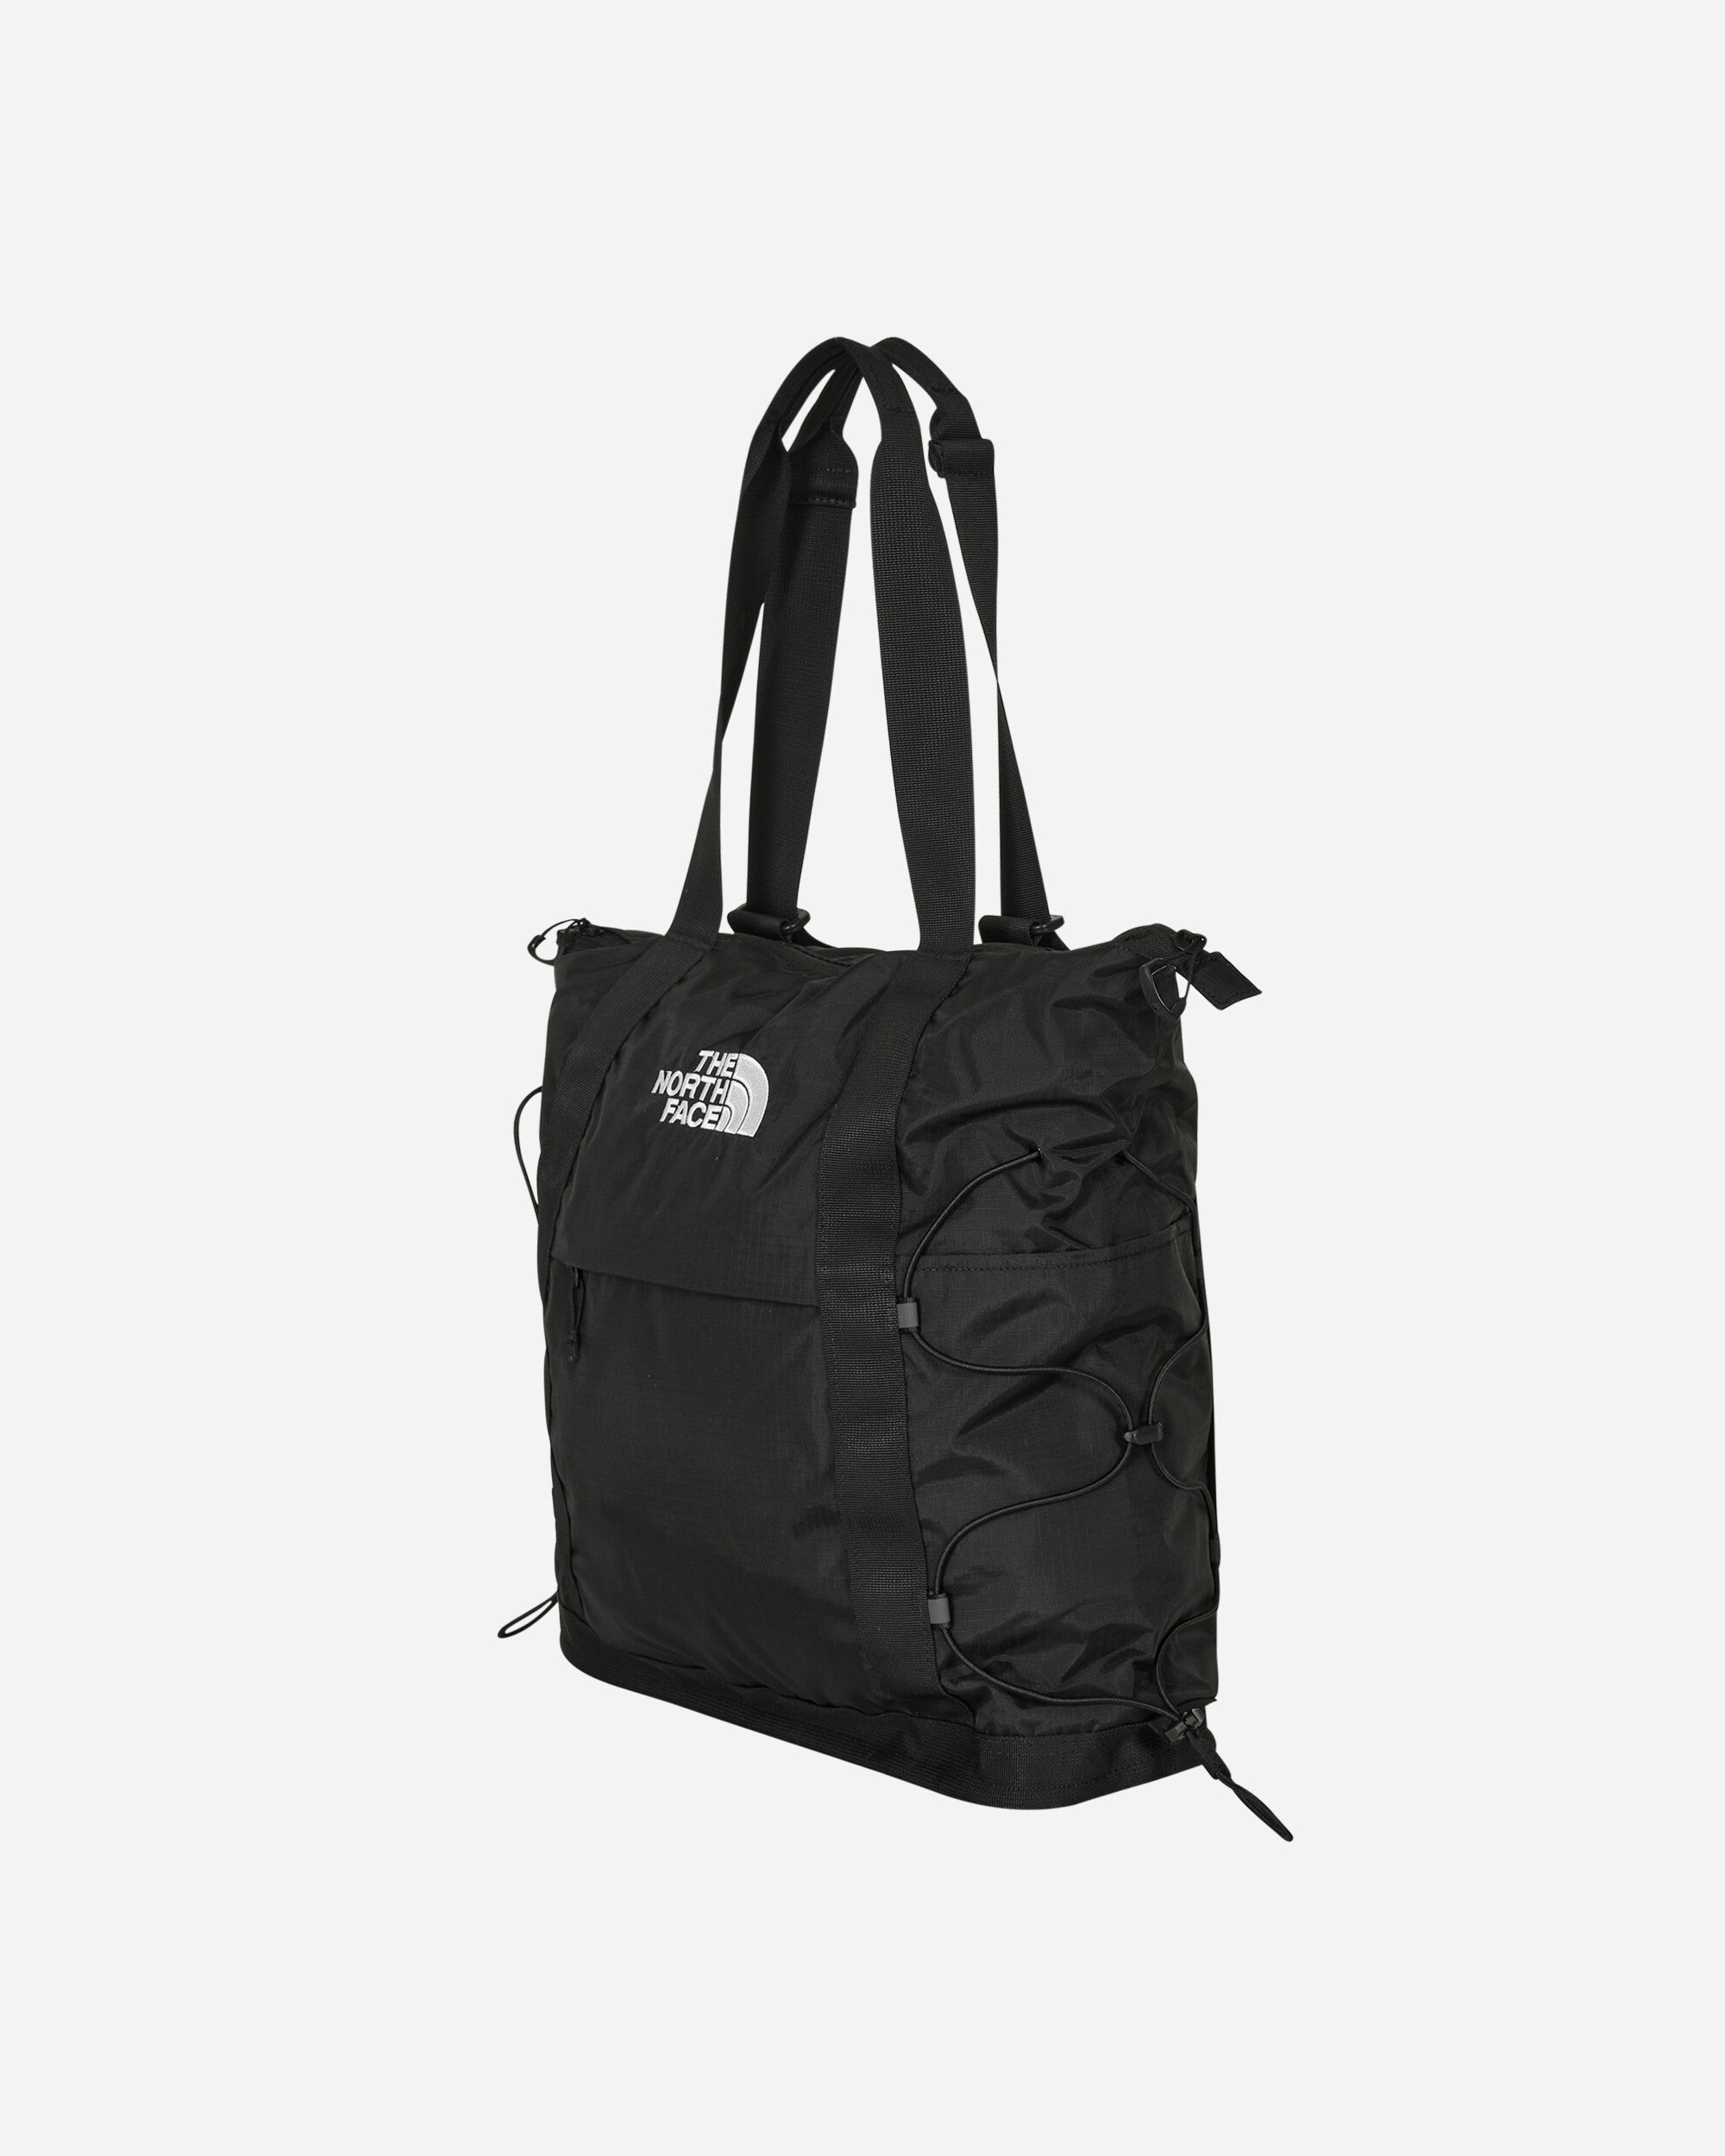 The North Face Borealis Tote Tnf Black/Tnf Black Bags and Backpacks Tote Bags NF0A52SV KX71 